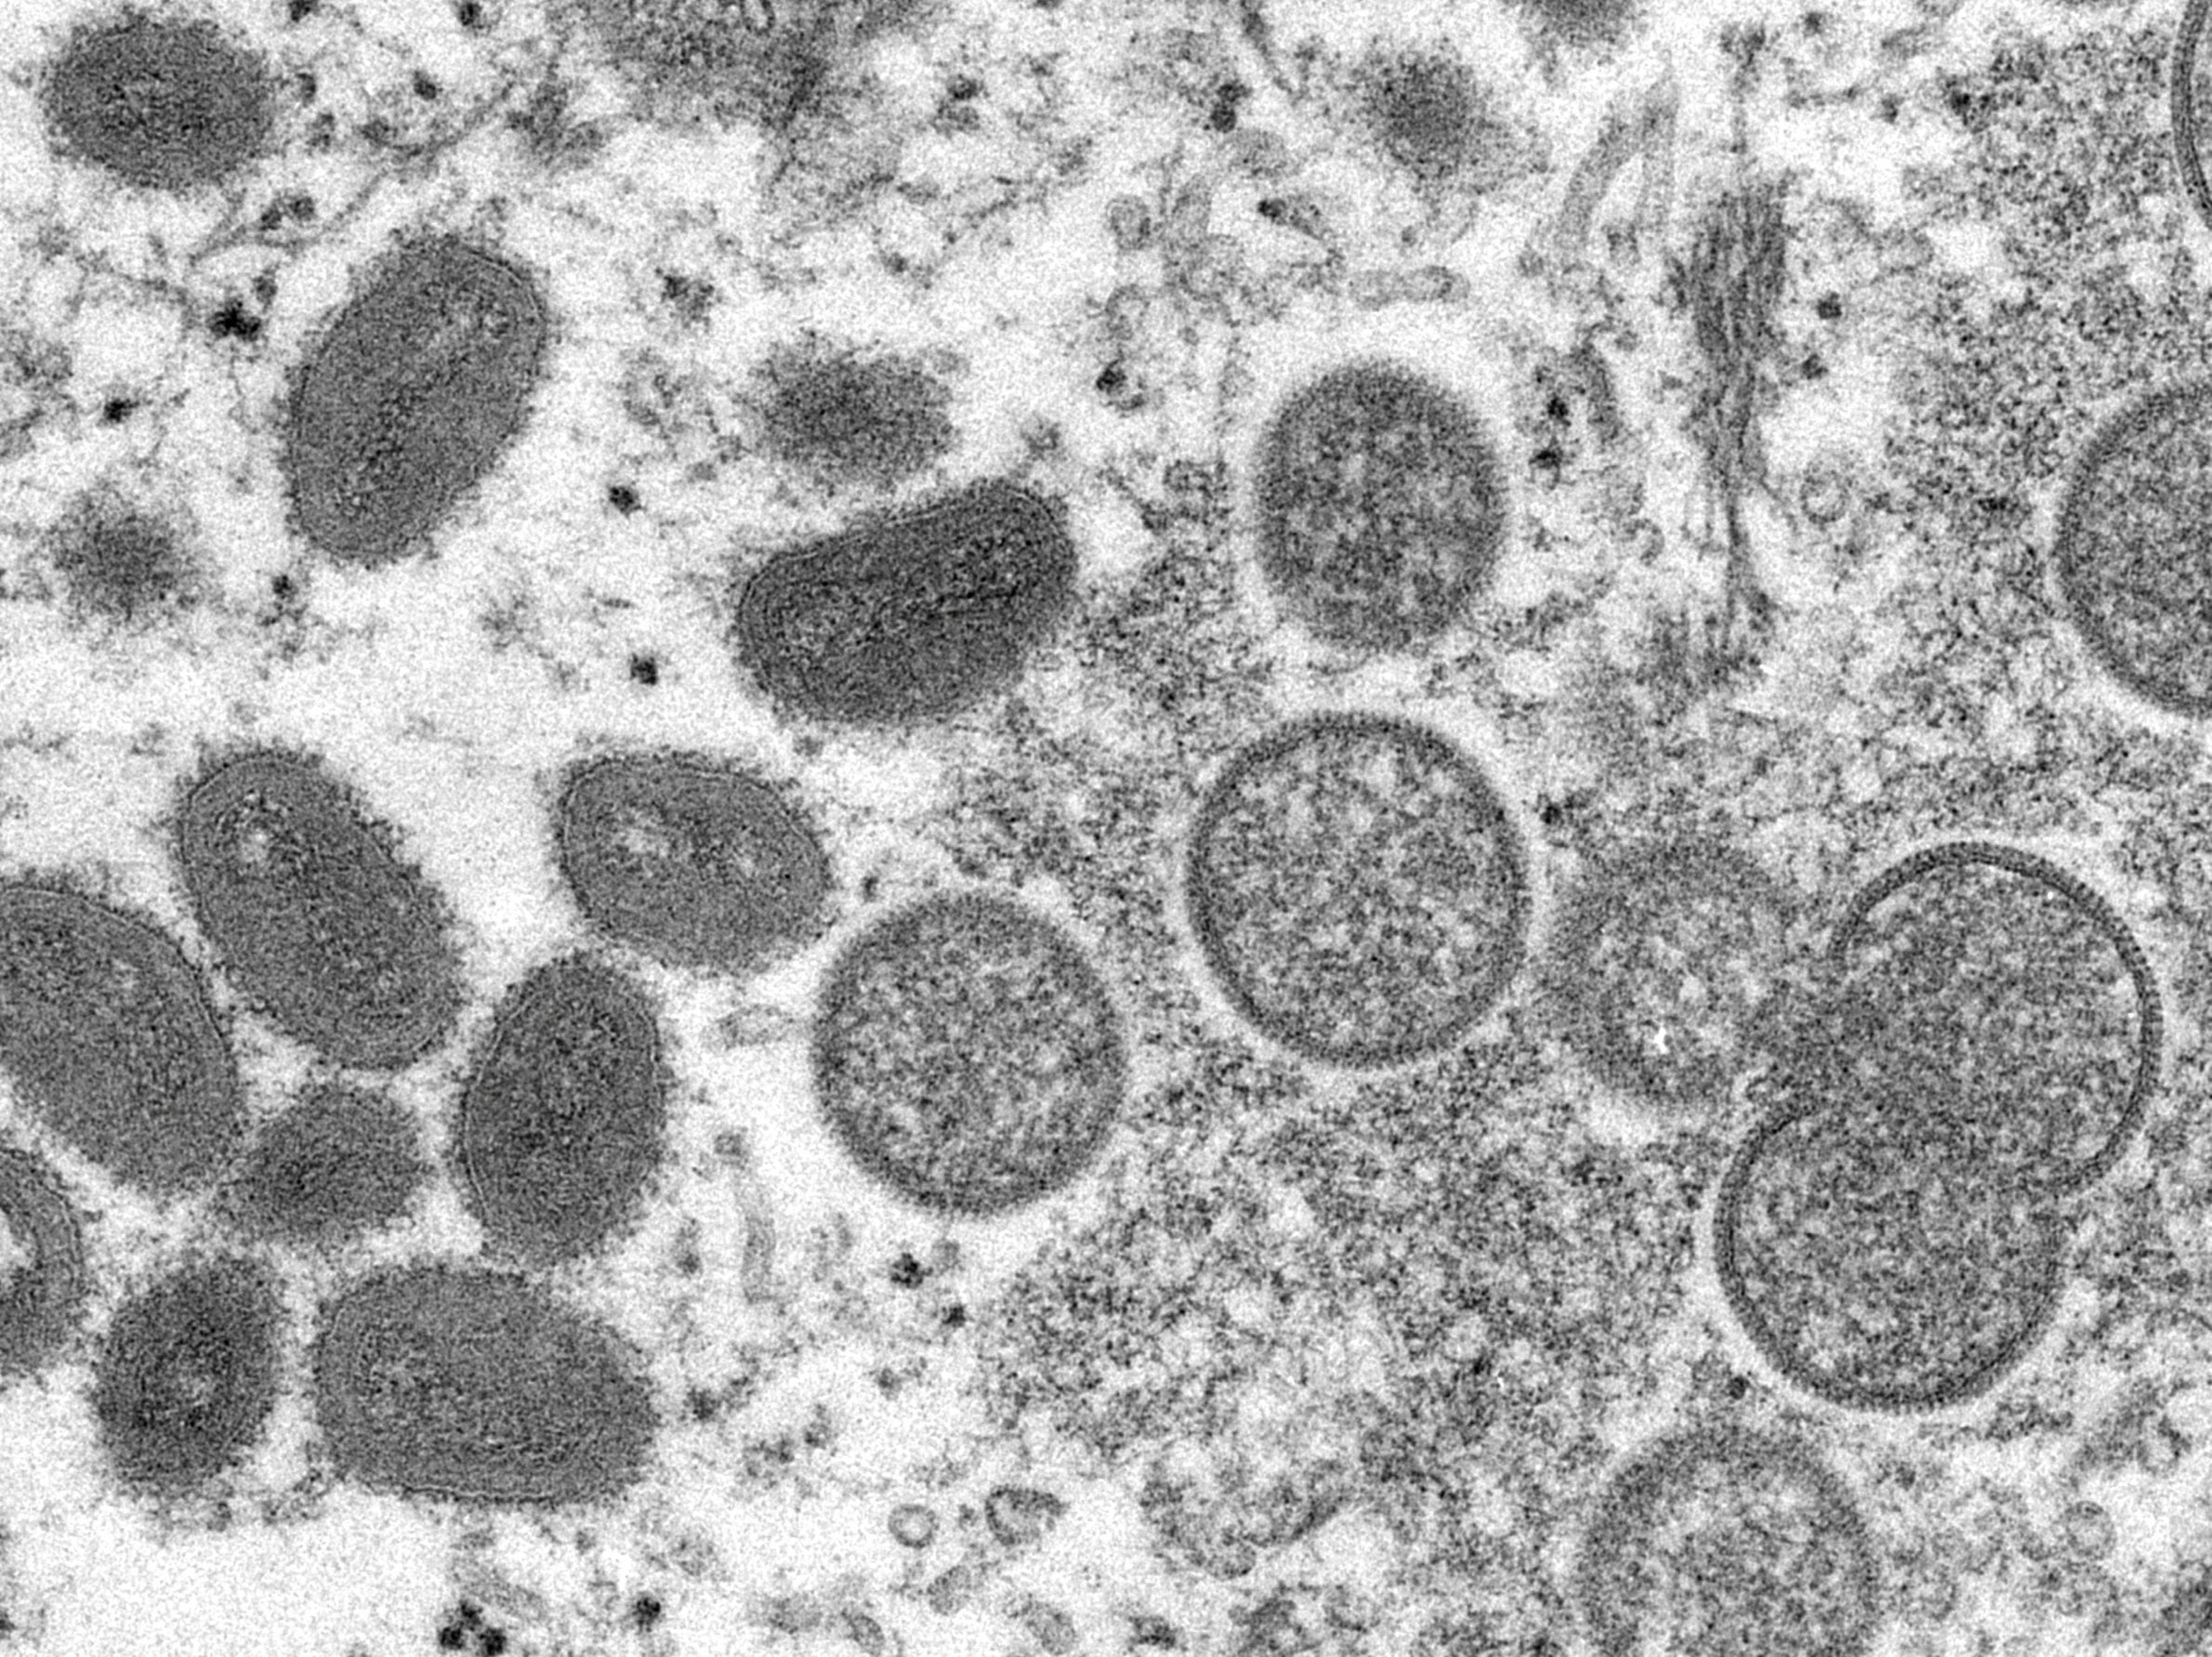 An electron microscopic image shows mature, oval-shaped monkeypox virus particles